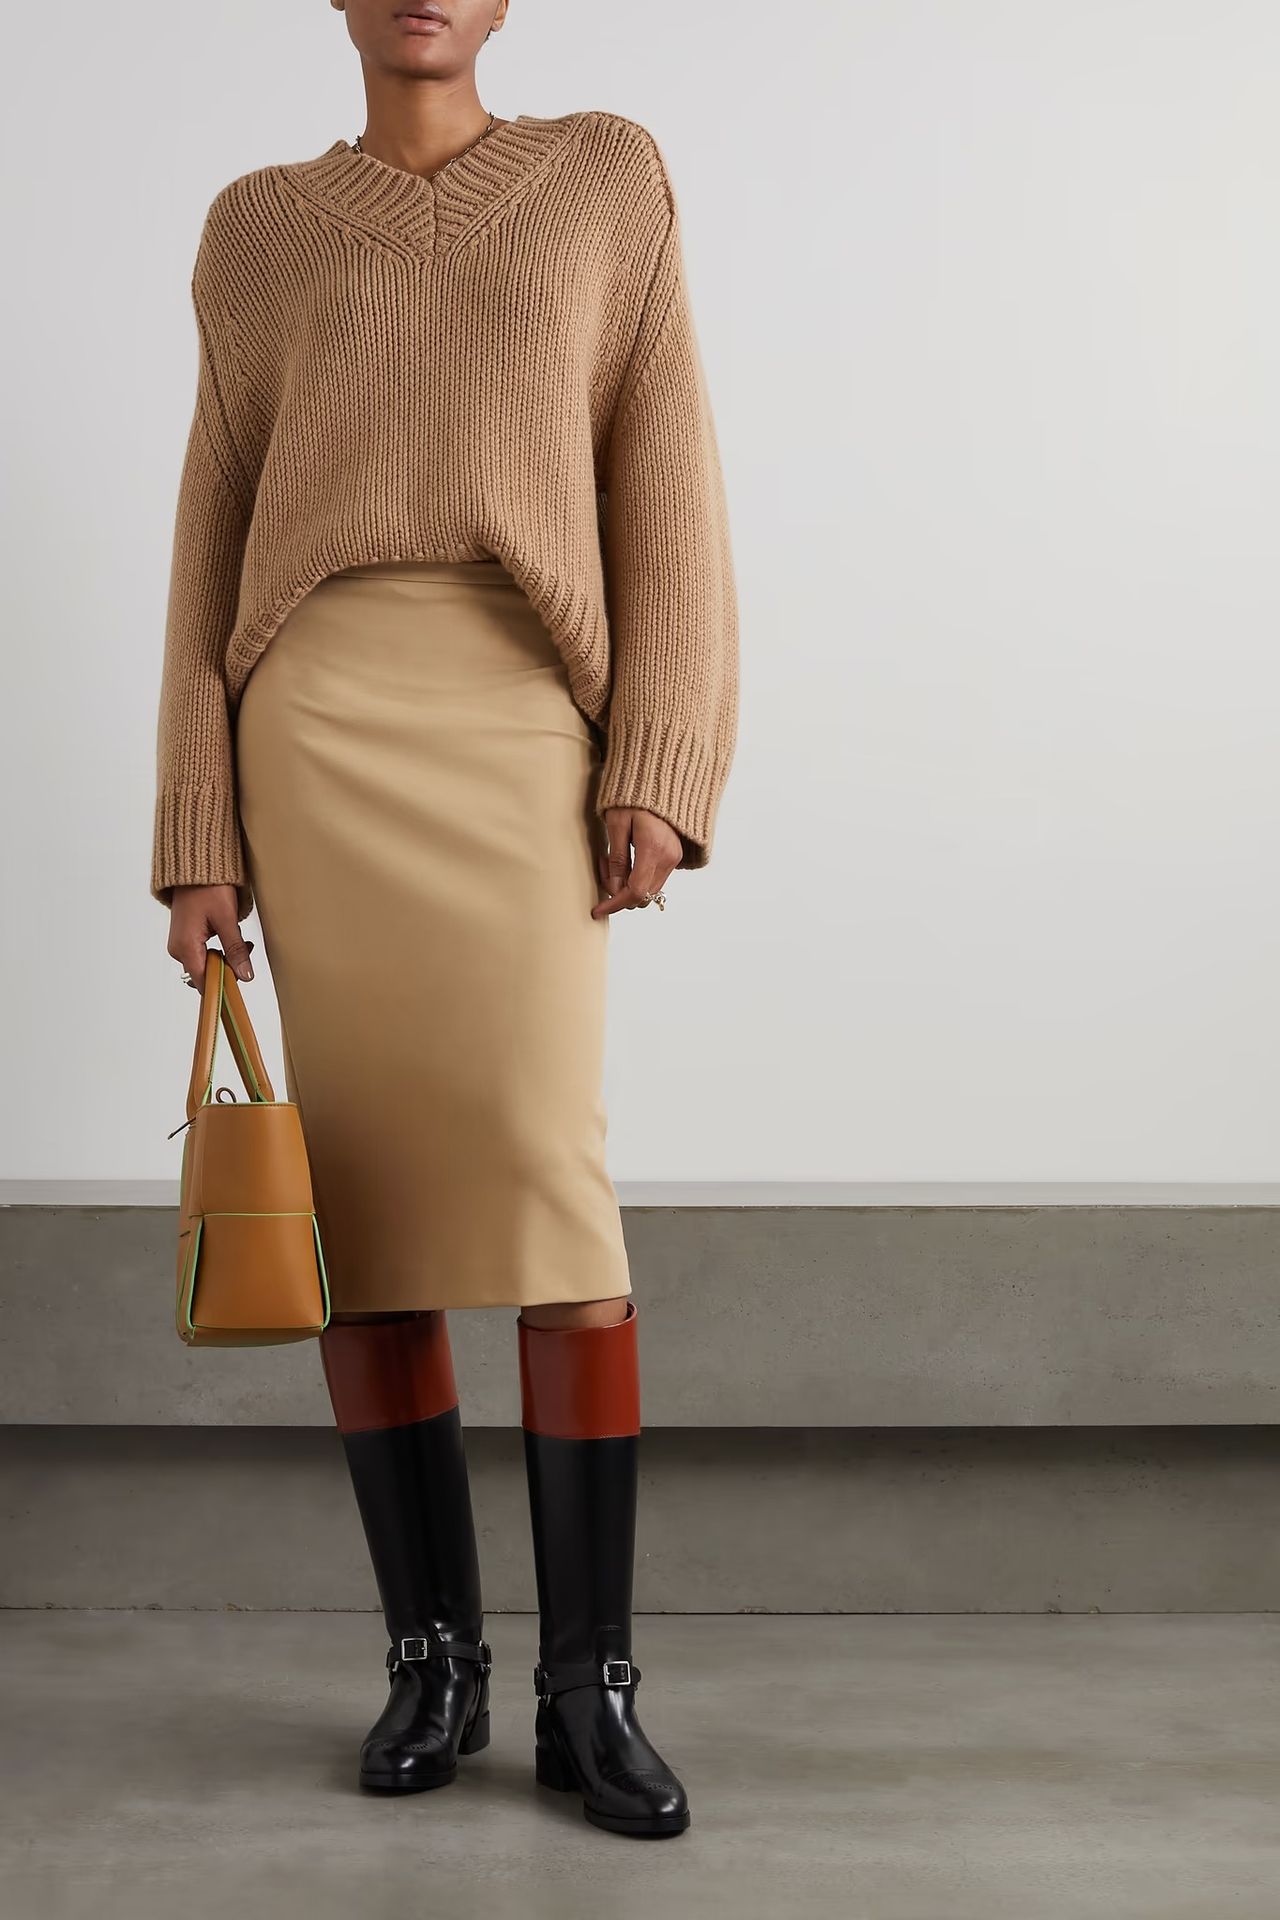 13 Ways to Wear Pencil Skirts Like Runways and Street Style | Who What Wear